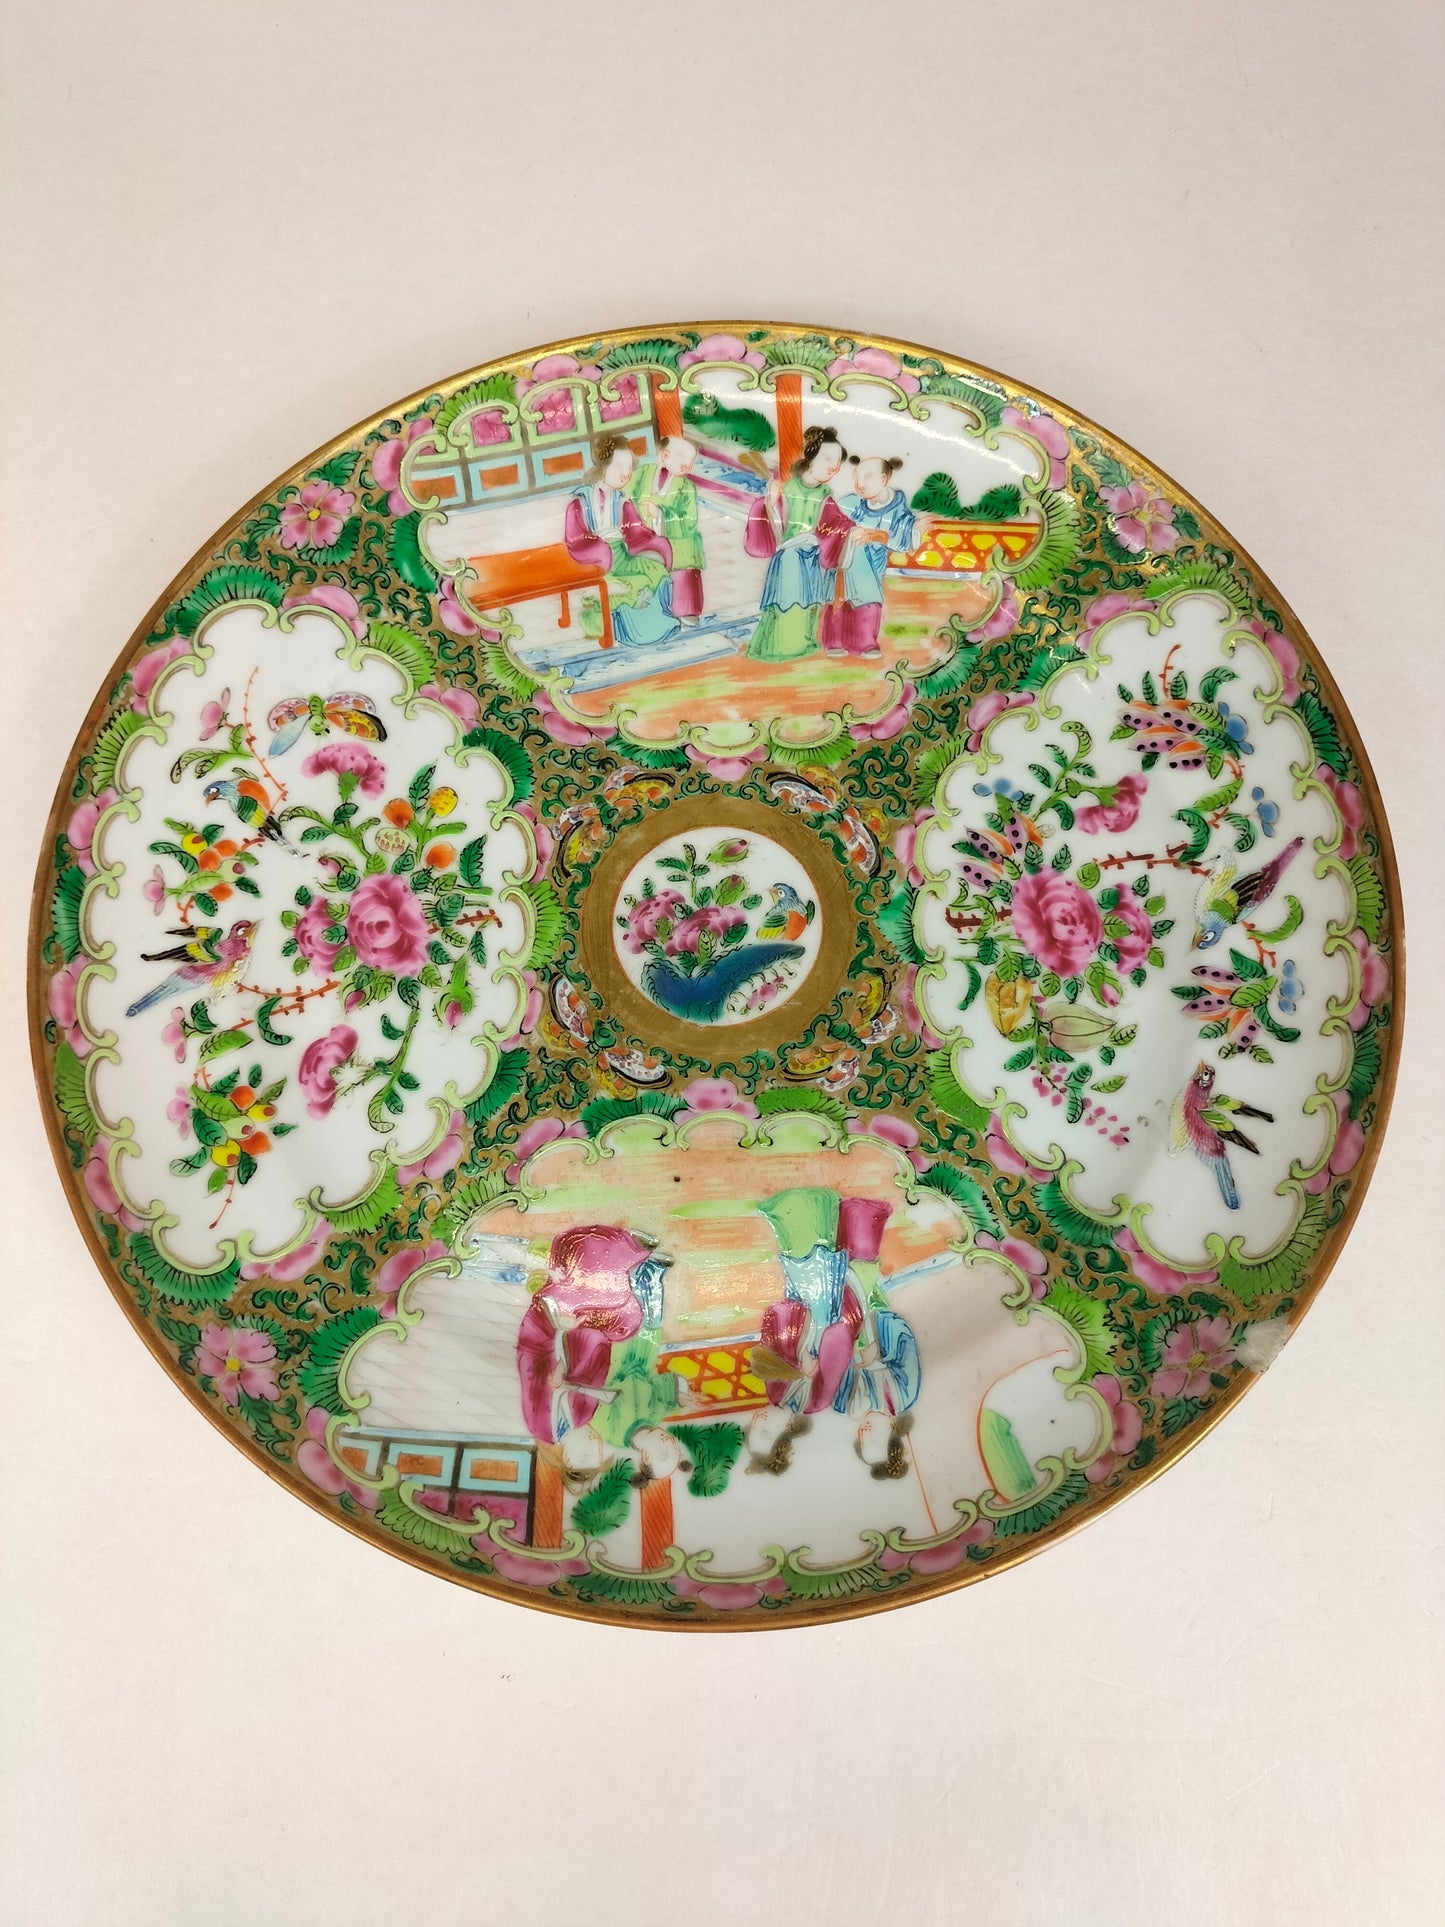 Antique Chinese canton rose medallion plate // Qing Dynasty - 19th century